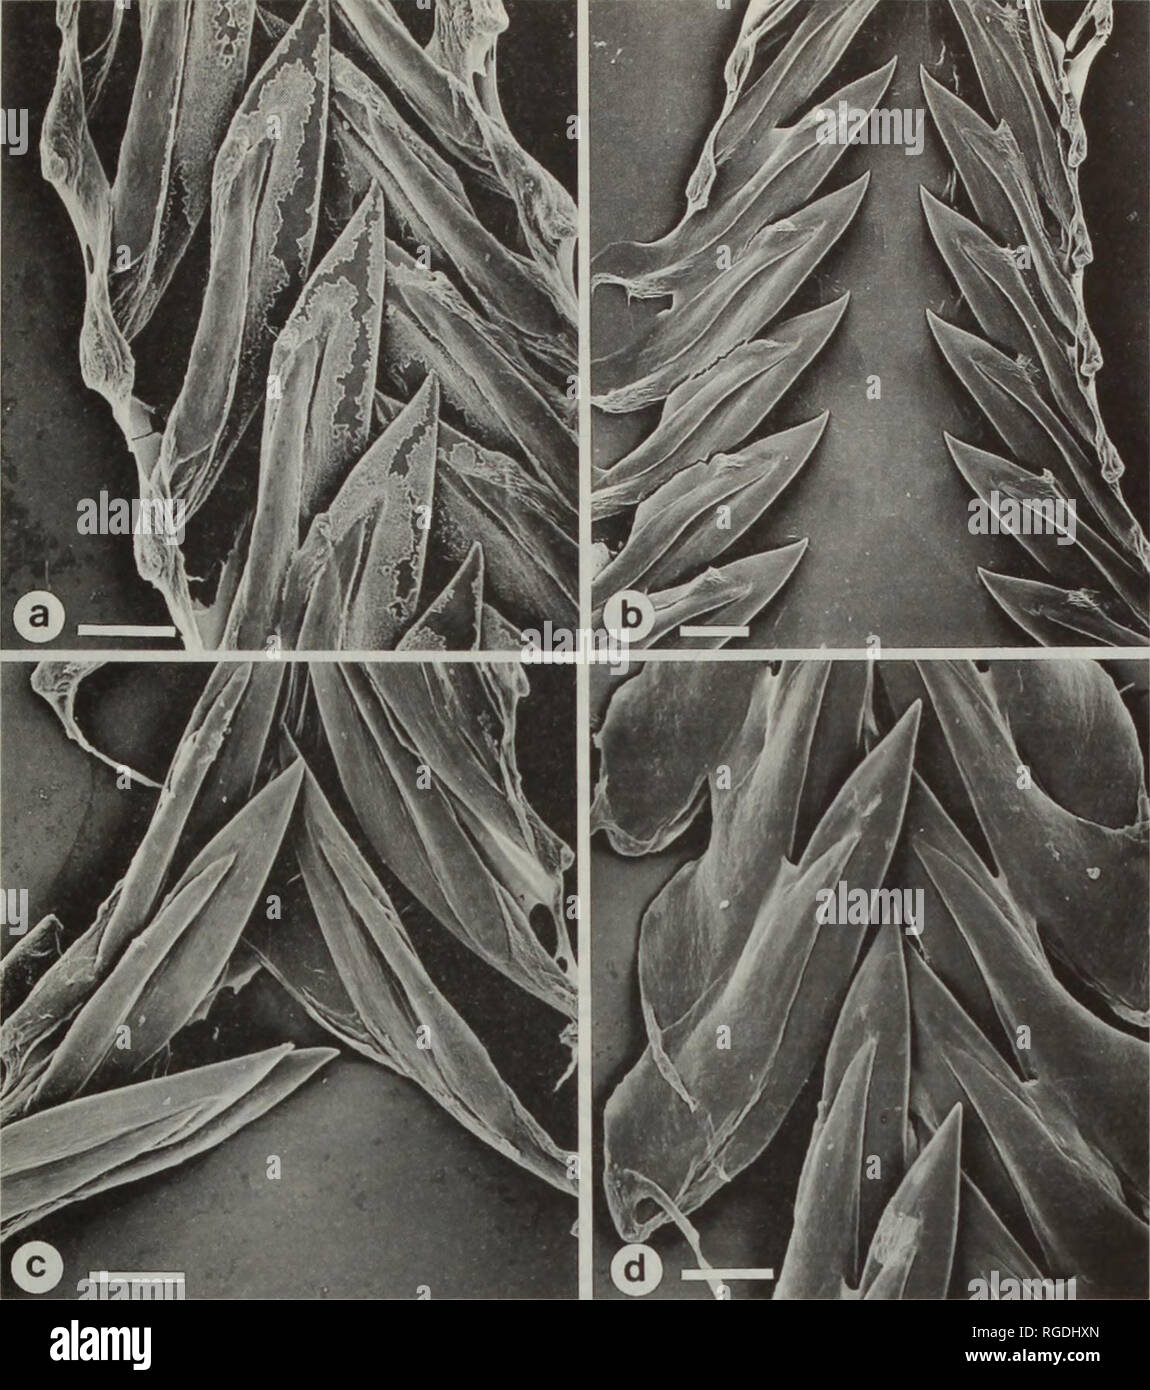 . Bulletin of the Natural History Museum Zoology. FOREGUT ANATOMY OF CRASSISPIRINE GASTROPODS 59. Fig. 4 Radulae of Crassispirinae. a. Crassispira (Crassispira) incrassata b. Crassispira (Crassispira) maura c, Crassispira (Gibbaspira) dysoni d, C. (Glossispira) harfordiana flucki. Scale bars = 20|jm. walls are equally developed along its length.There is a small anterior buccal tube sphincter, positioned at the base of the small sac-like enlargement of the buccal tube, which also has an epithelial pad. An intermediate buccal tube sphincter is absent. The buccal tube is very narrow, both inside  Stock Photo